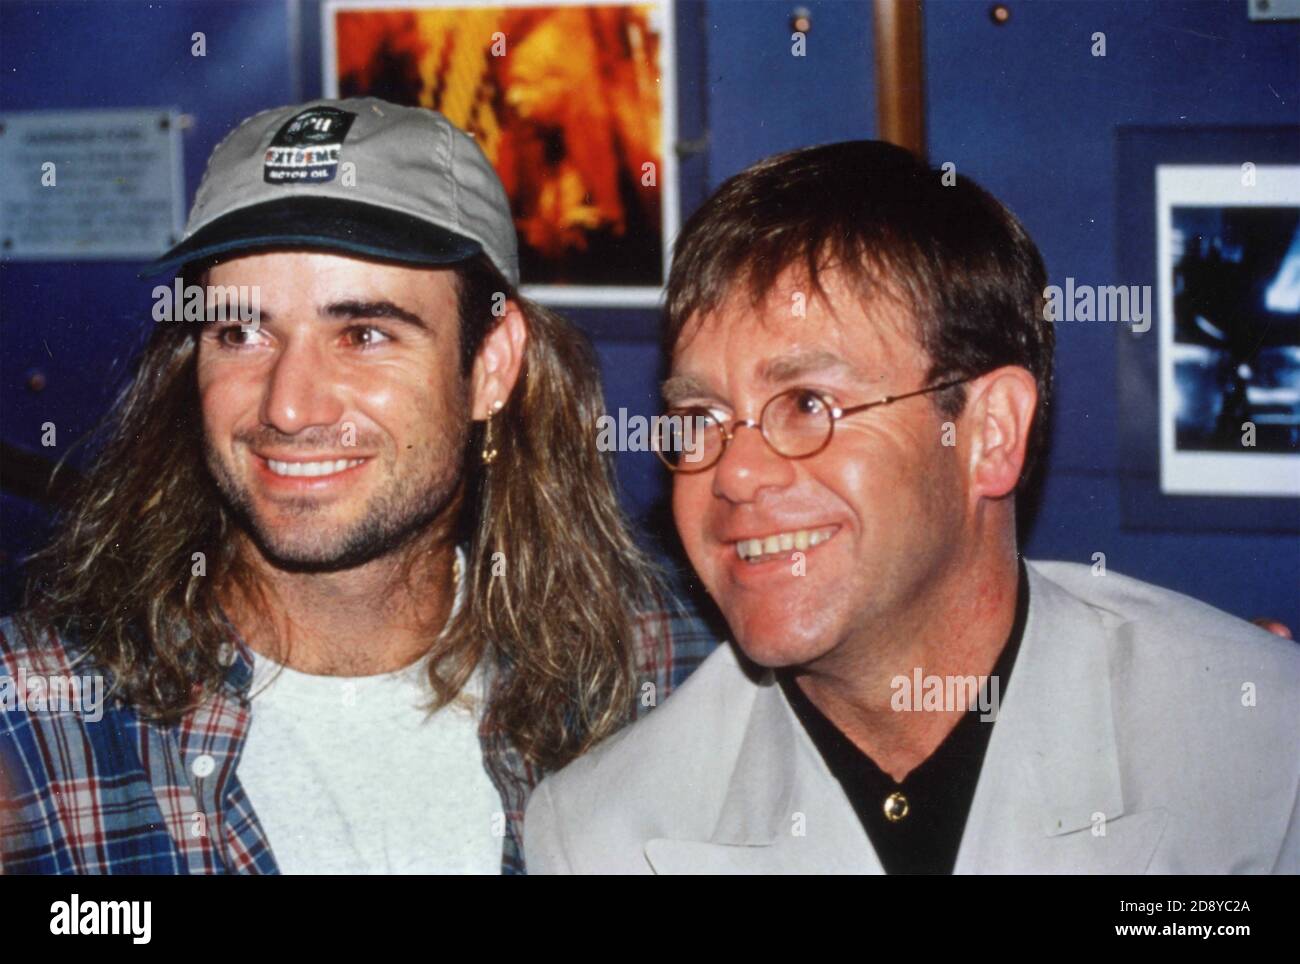 American tennis player Andre Agassi and English musician Elton John, 1994 Stock Photo